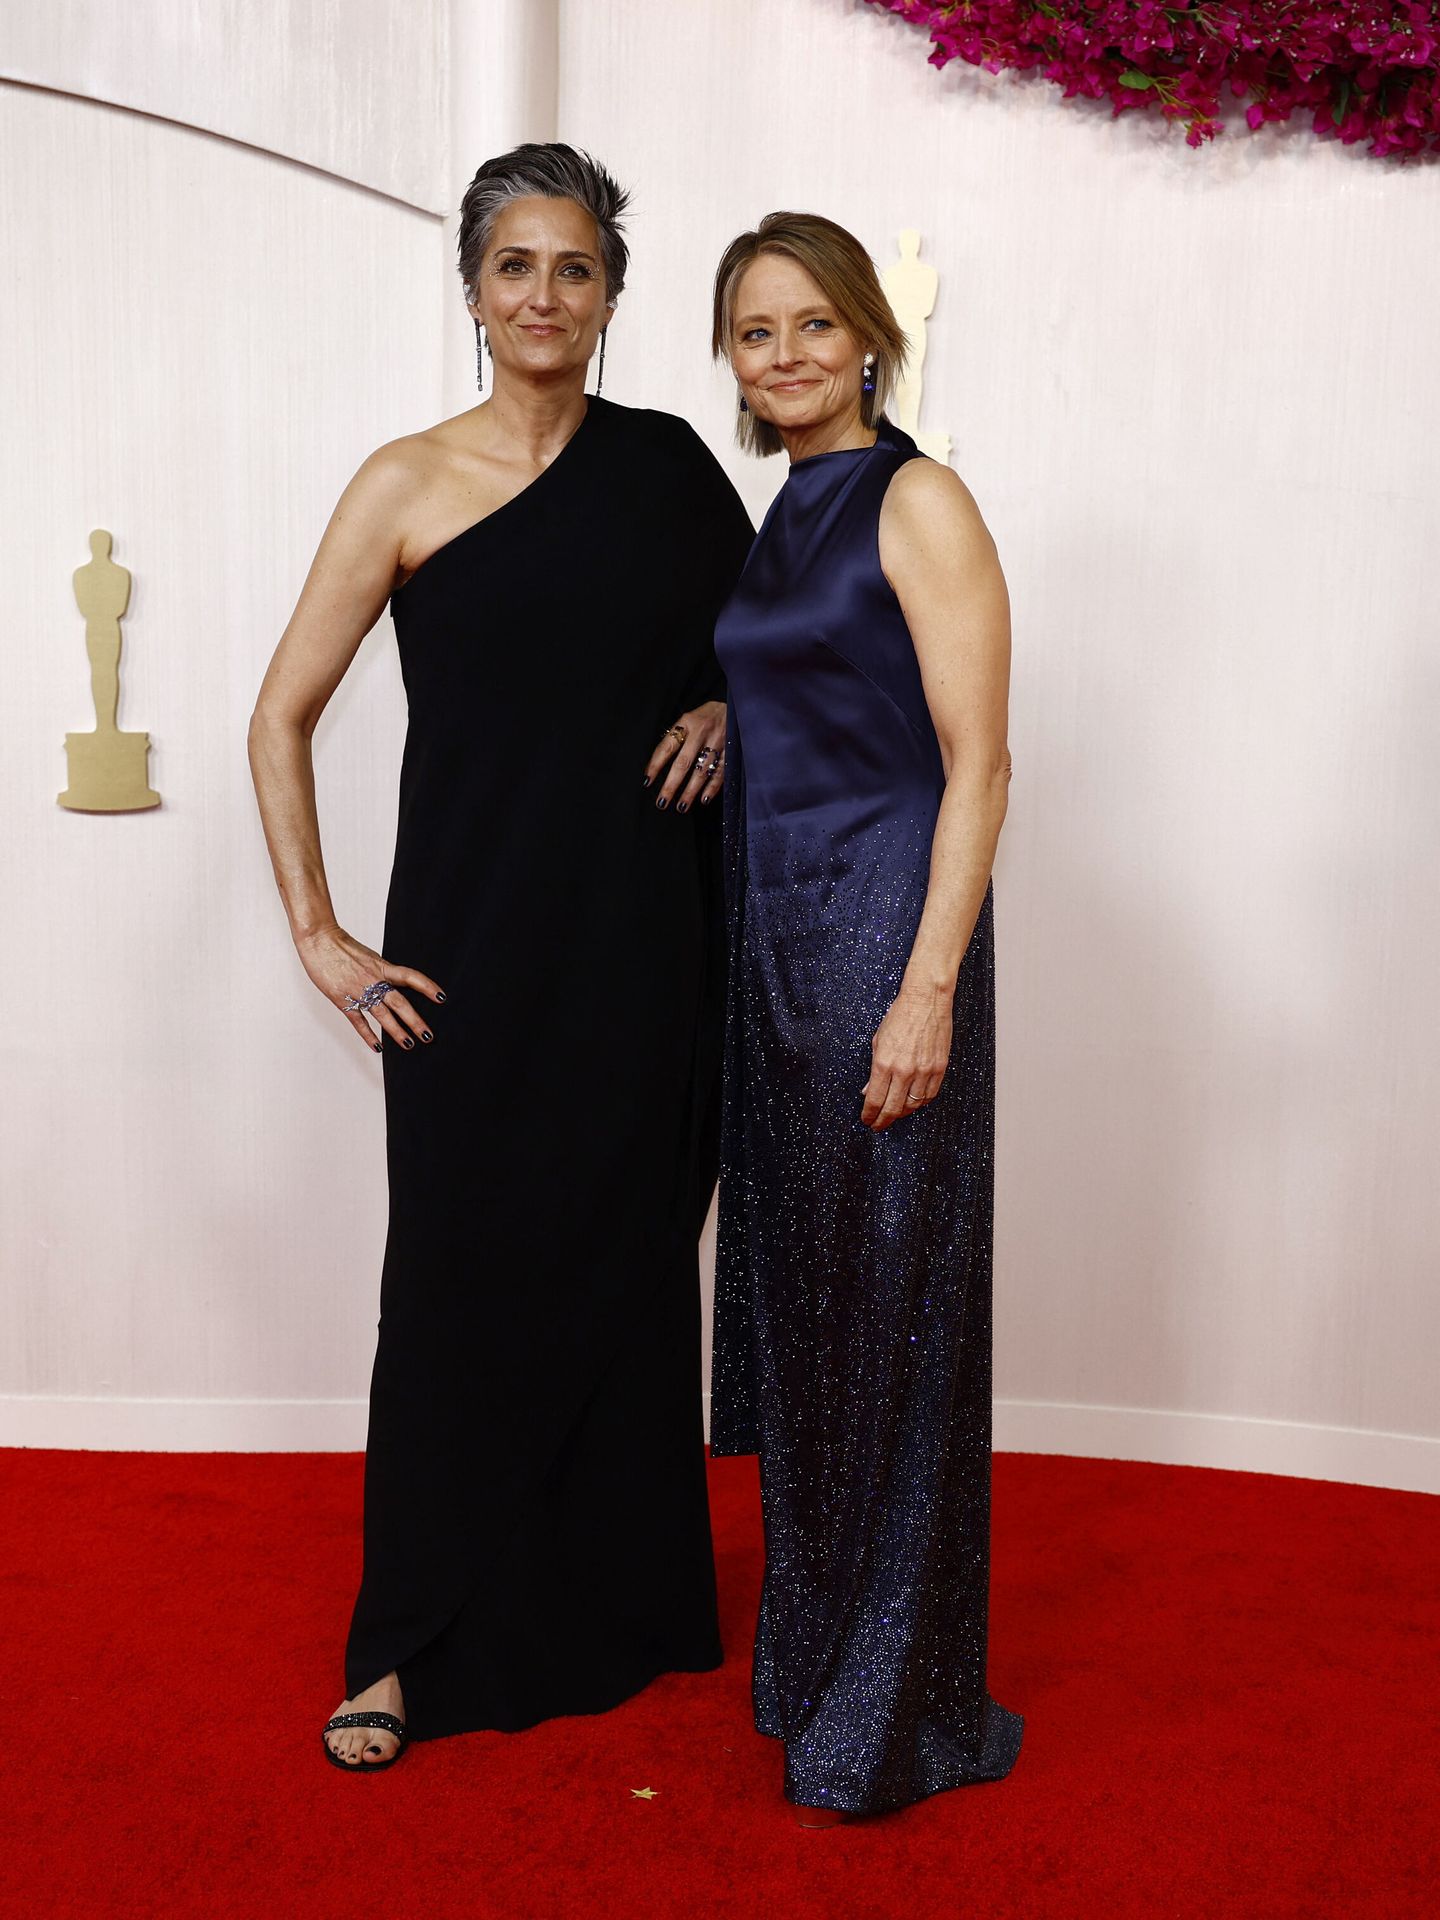 Jodie Foster and Alexandra Hedison pose on the red carpet during the Oscars arrivals at the 96th Academy Awards in Hollywood, Los Angeles, California, U.S., March 10, 2024. REUTERS Sarah Meyssonnier